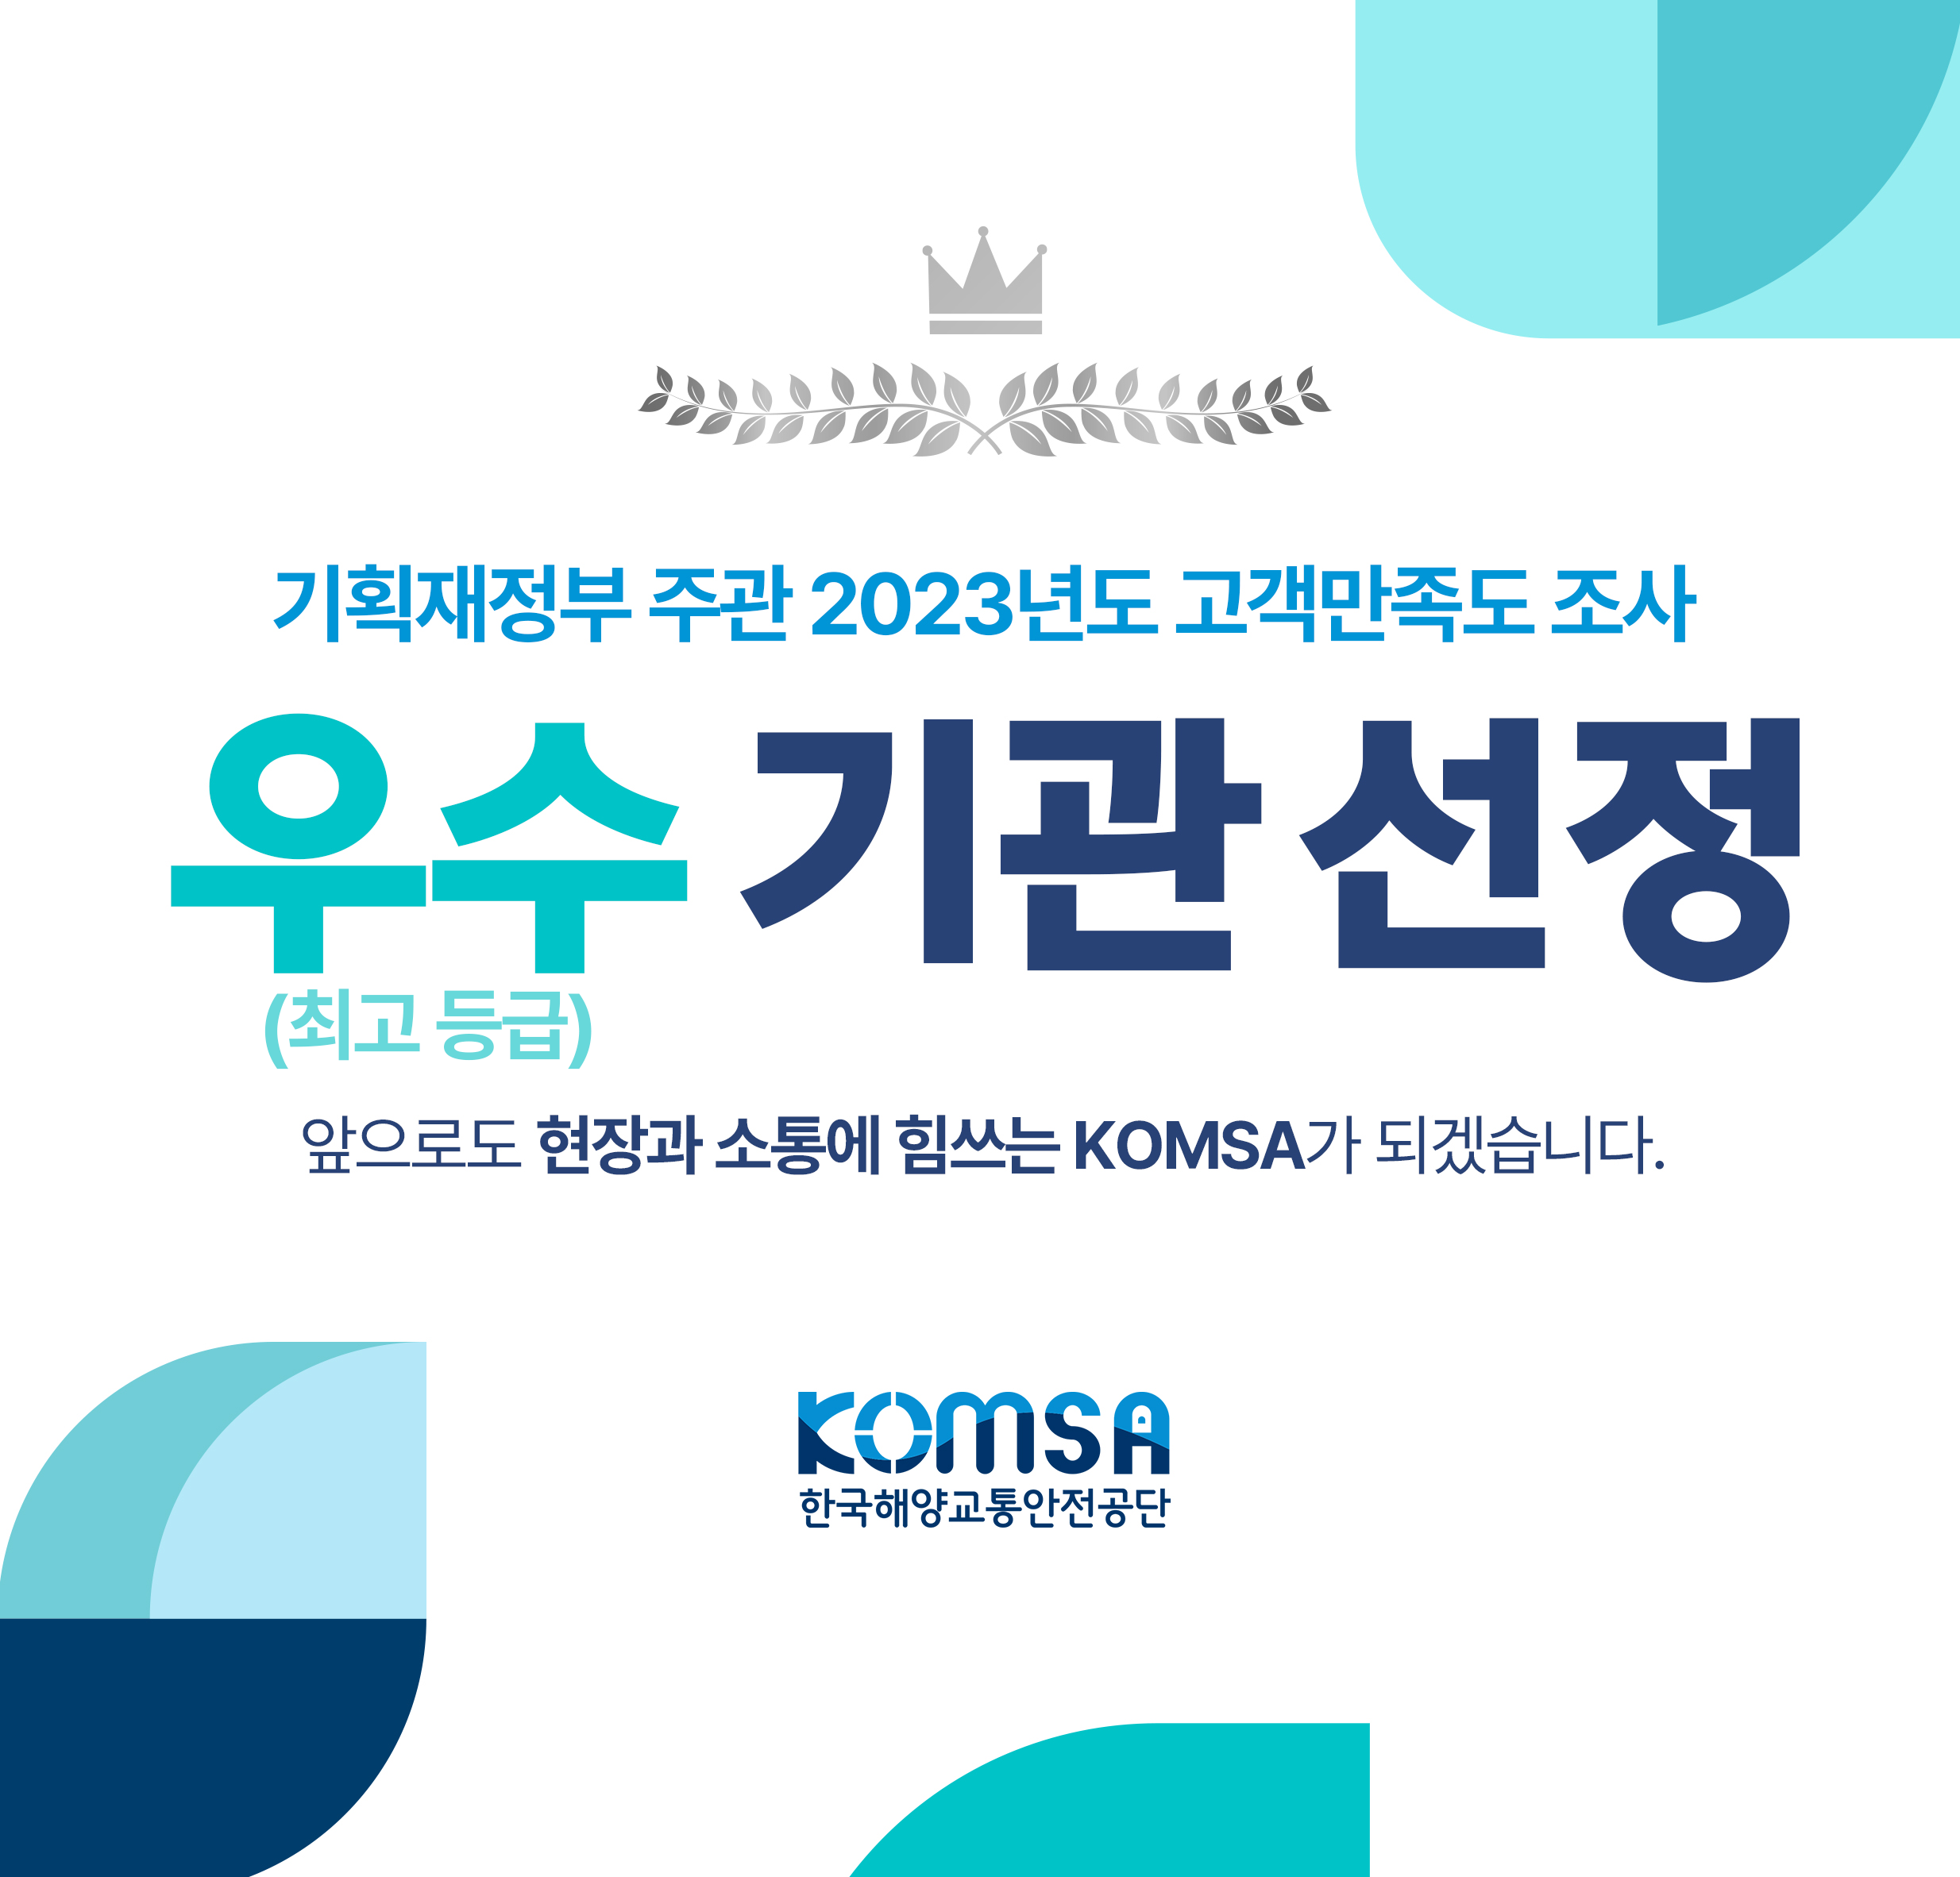 https://www.komsa.or.kr/kor/;jsessionid=44874D9A6AEAA1D0A41C34CED23E07C1